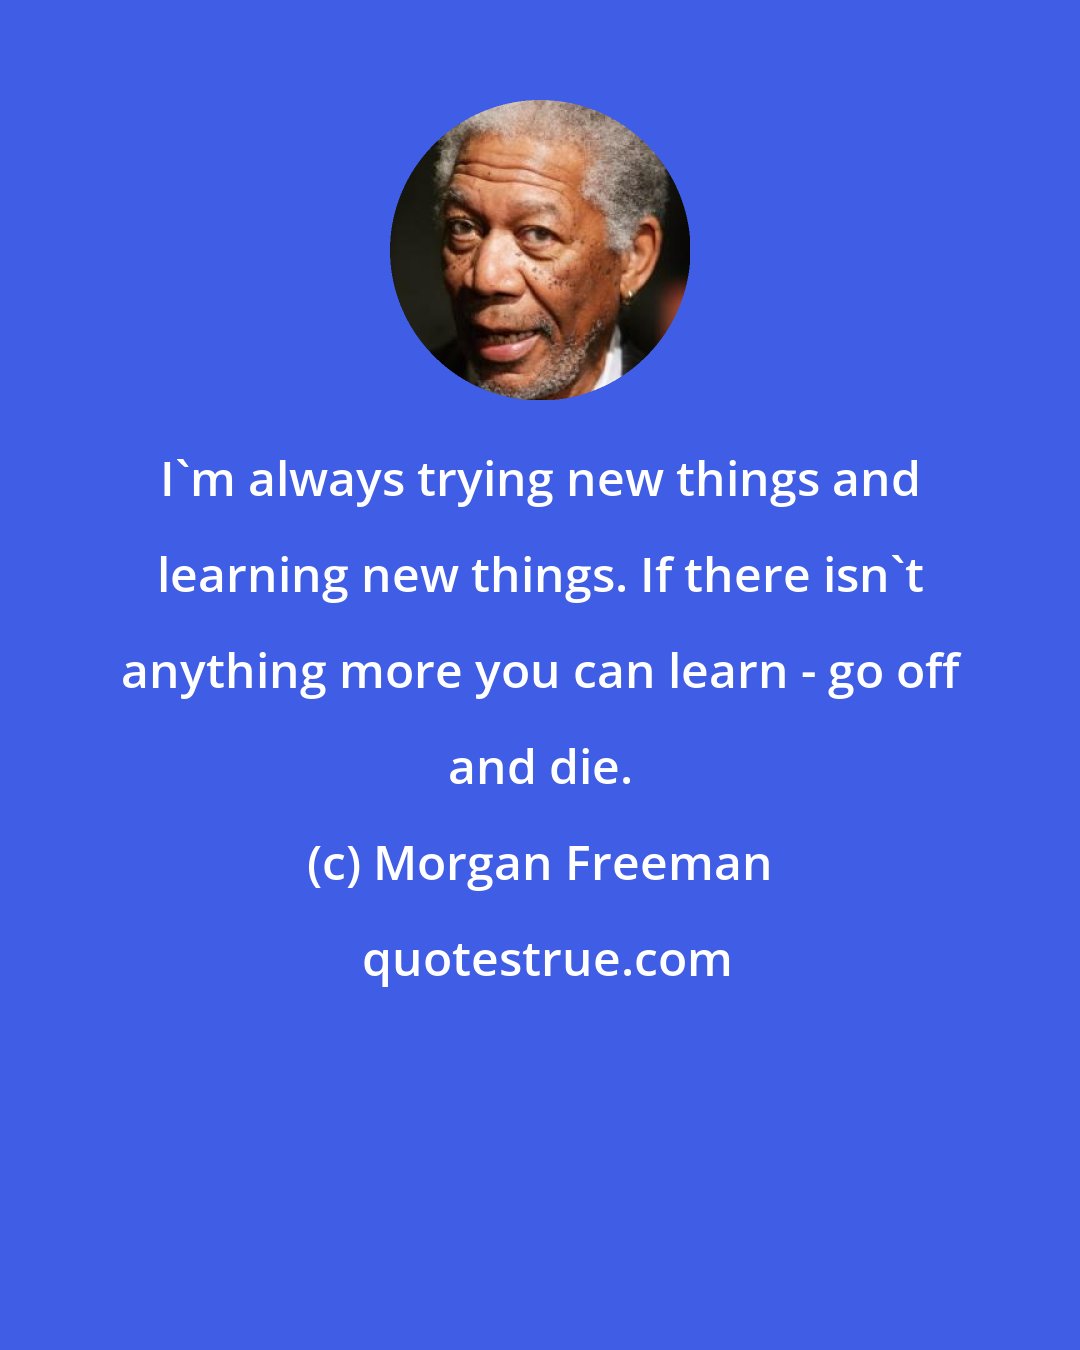 Morgan Freeman: I'm always trying new things and learning new things. If there isn't anything more you can learn - go off and die.